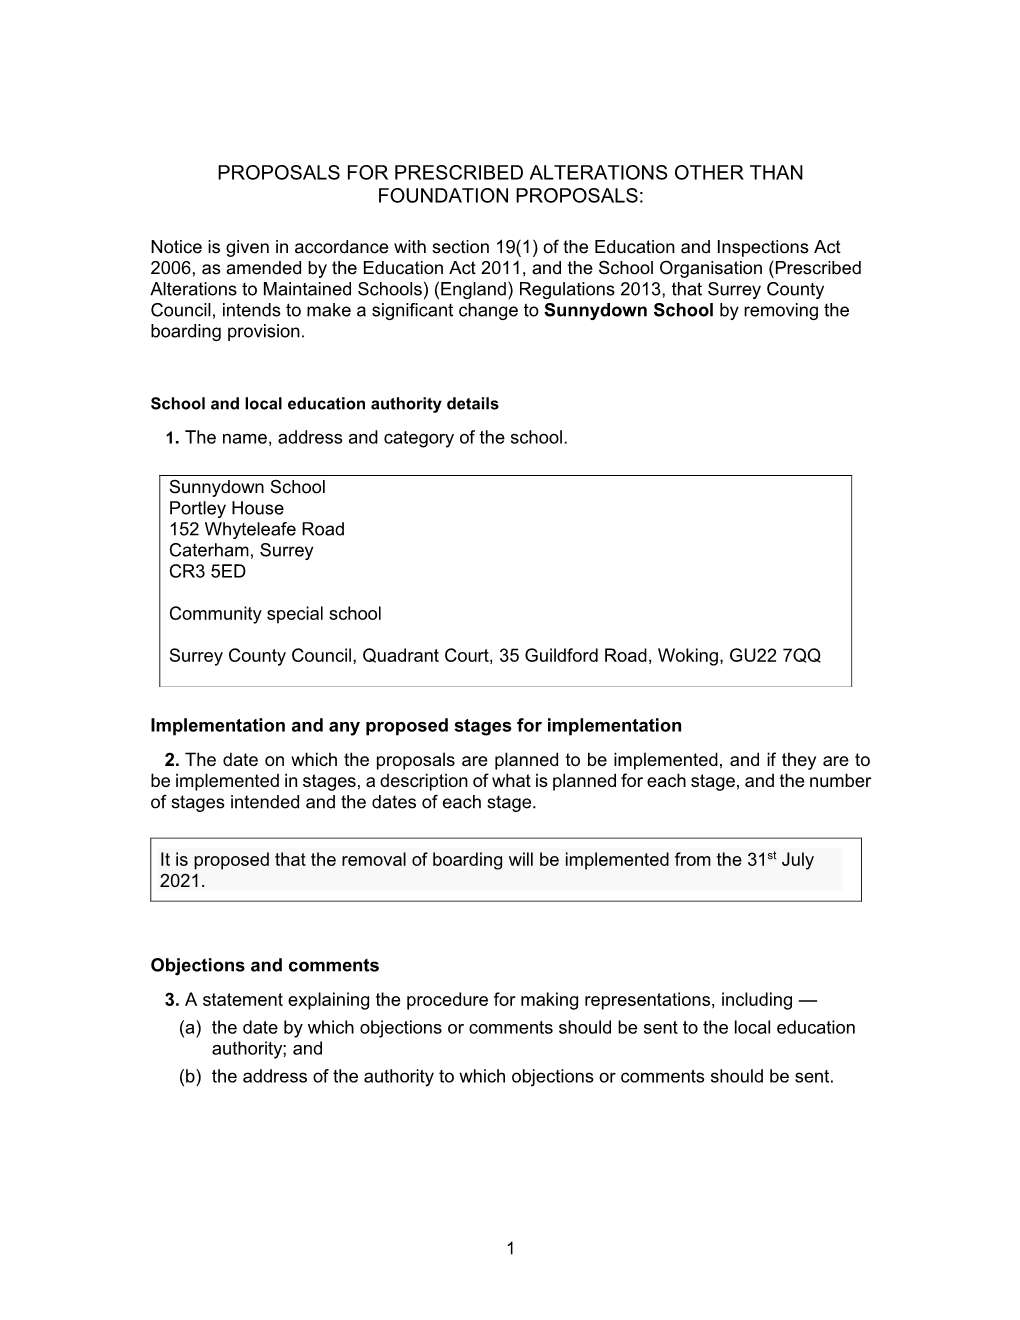 Full Statutory Notice for the Removal of Boarding Provision at Sunnydown School